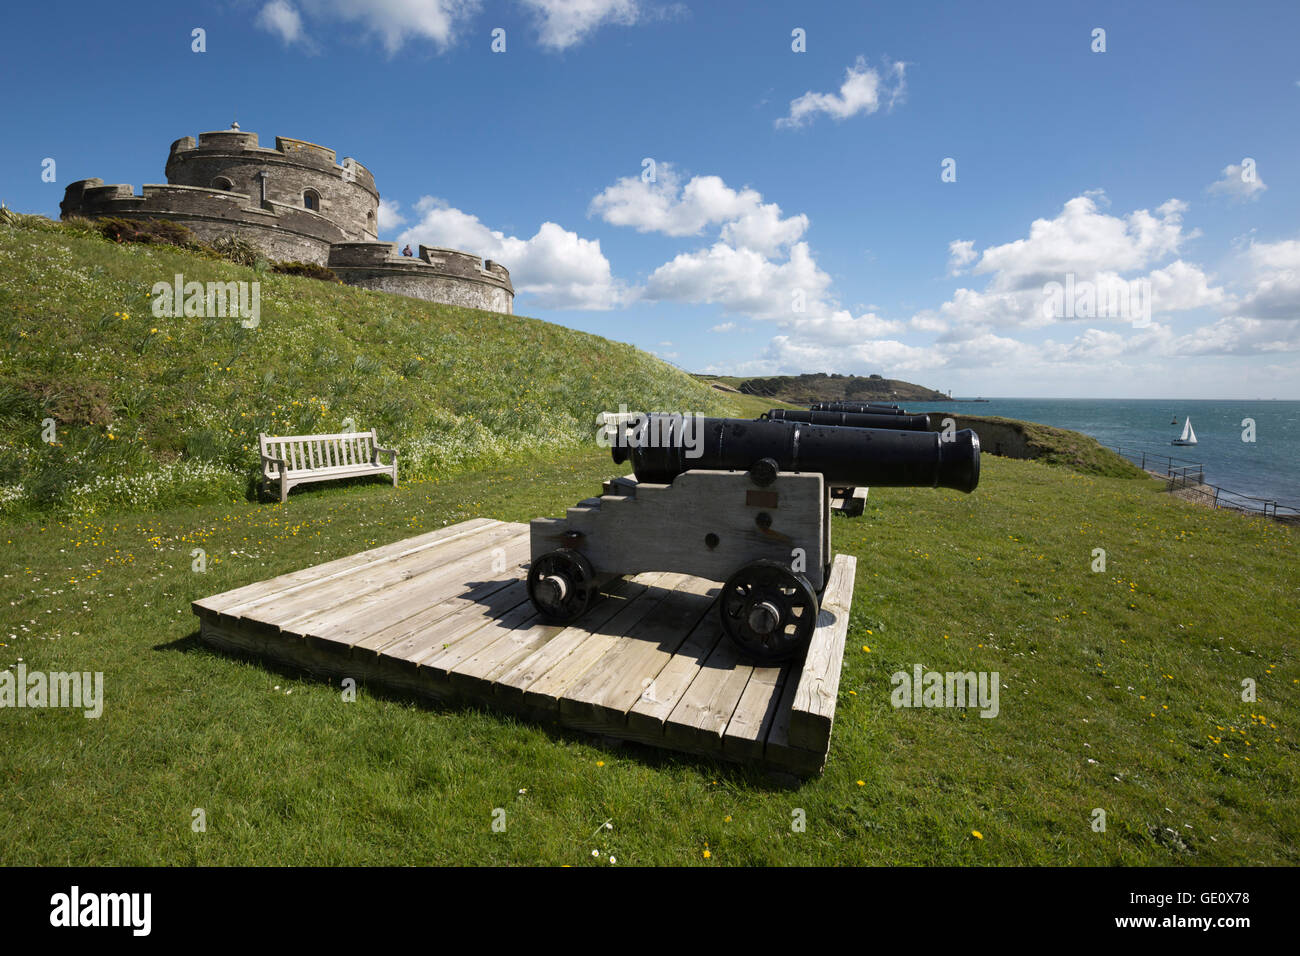 St Mawes Castle and cannons, St Mawes, Cornwall, England, United Kingdom, Europe Stock Photo